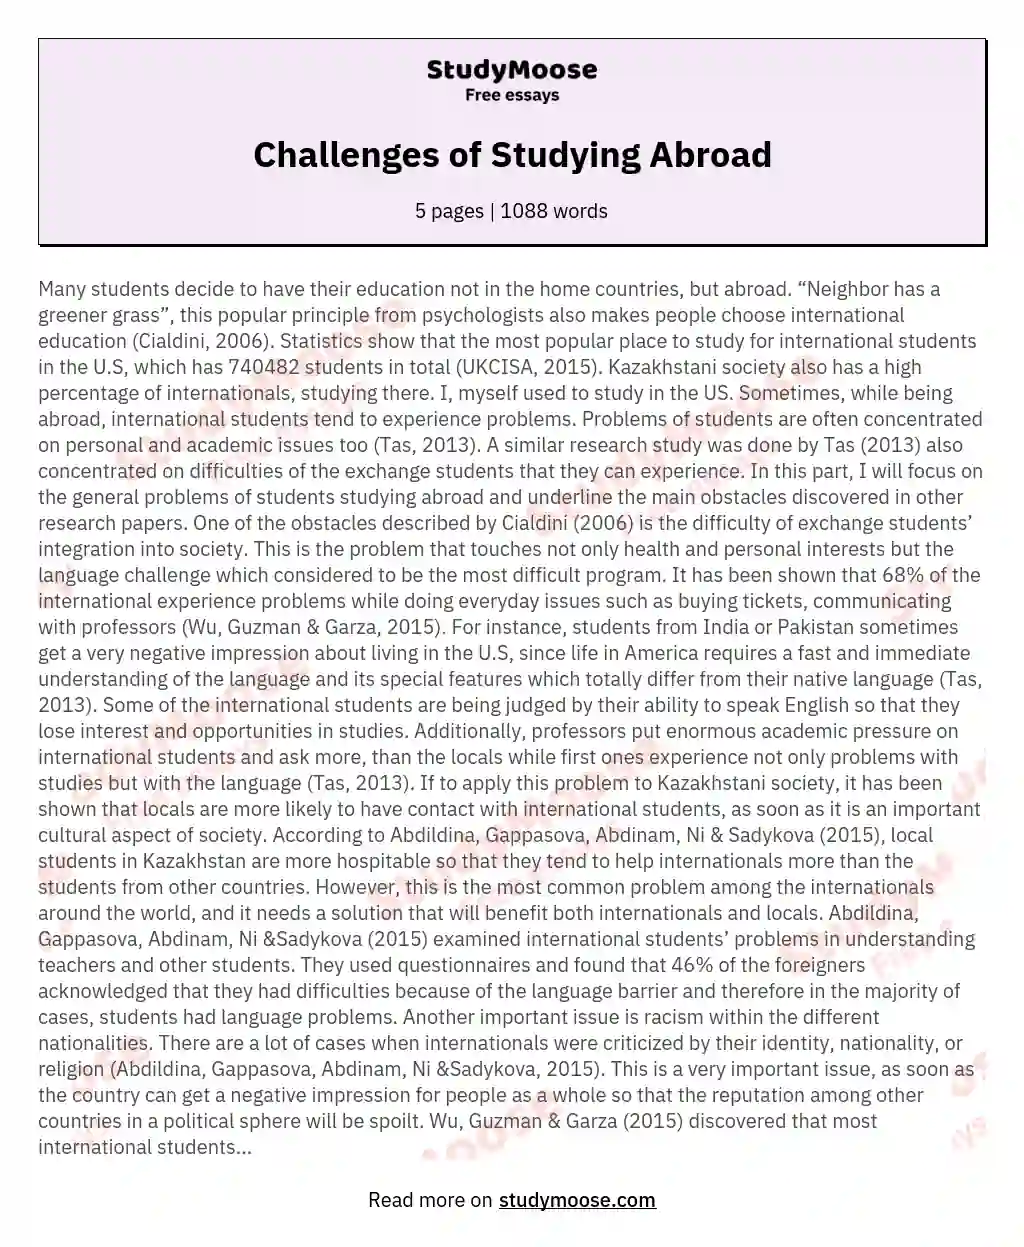 Challenges of Studying Abroad essay